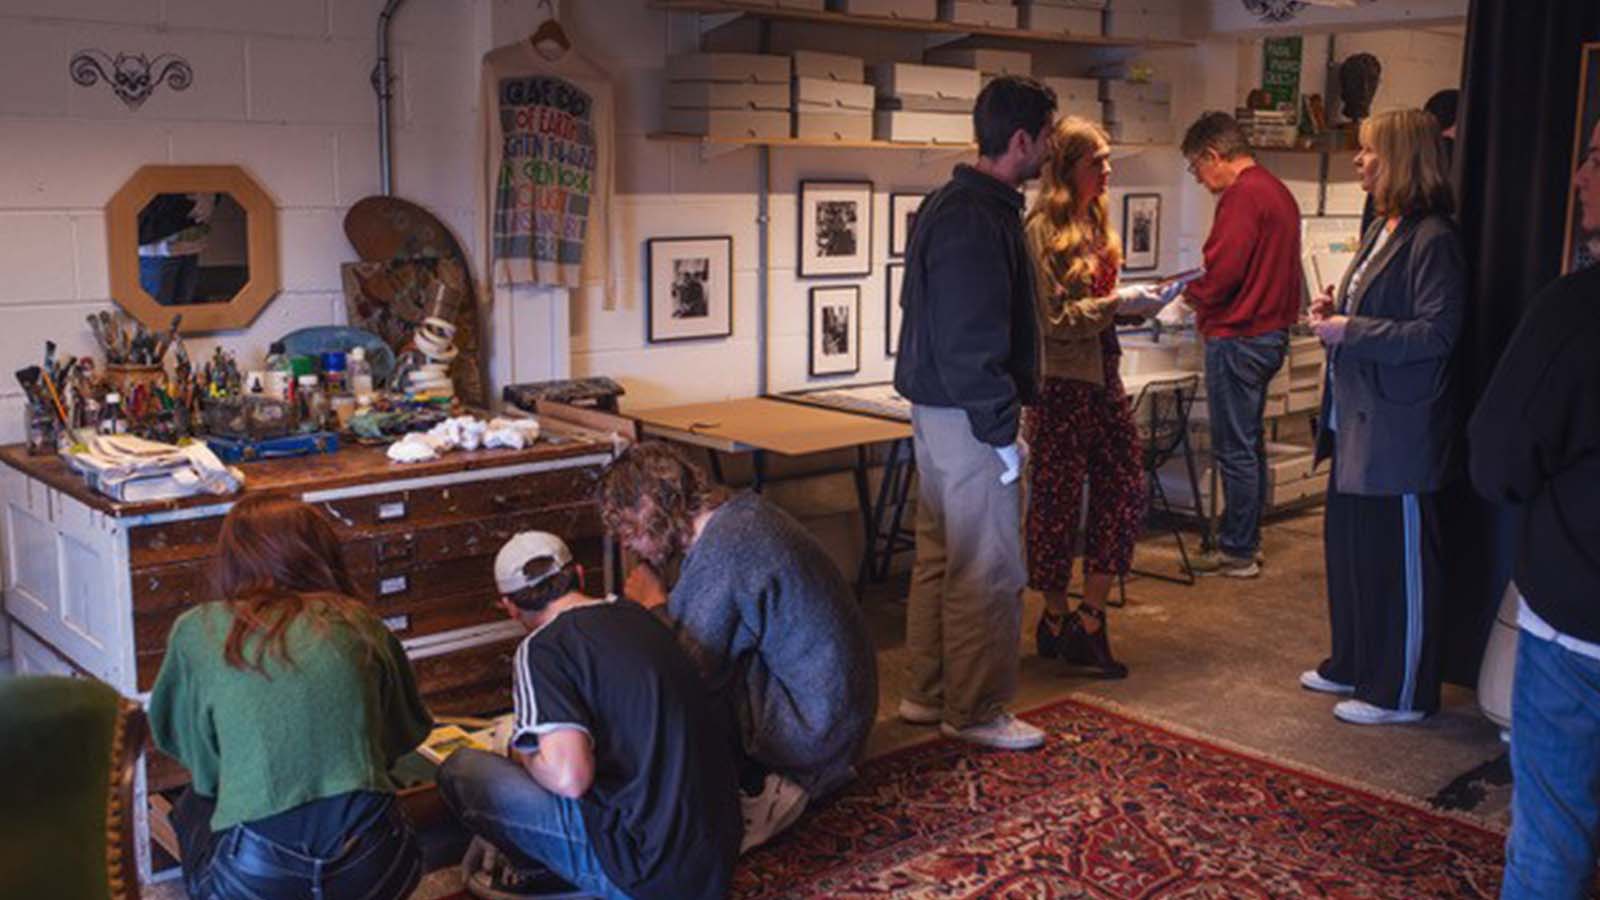 Several people exploring a small storage room with art supplies, desks and equipment, a patterned Persian rug, boxes on high shelves and framed professional black and white photos on the wall.